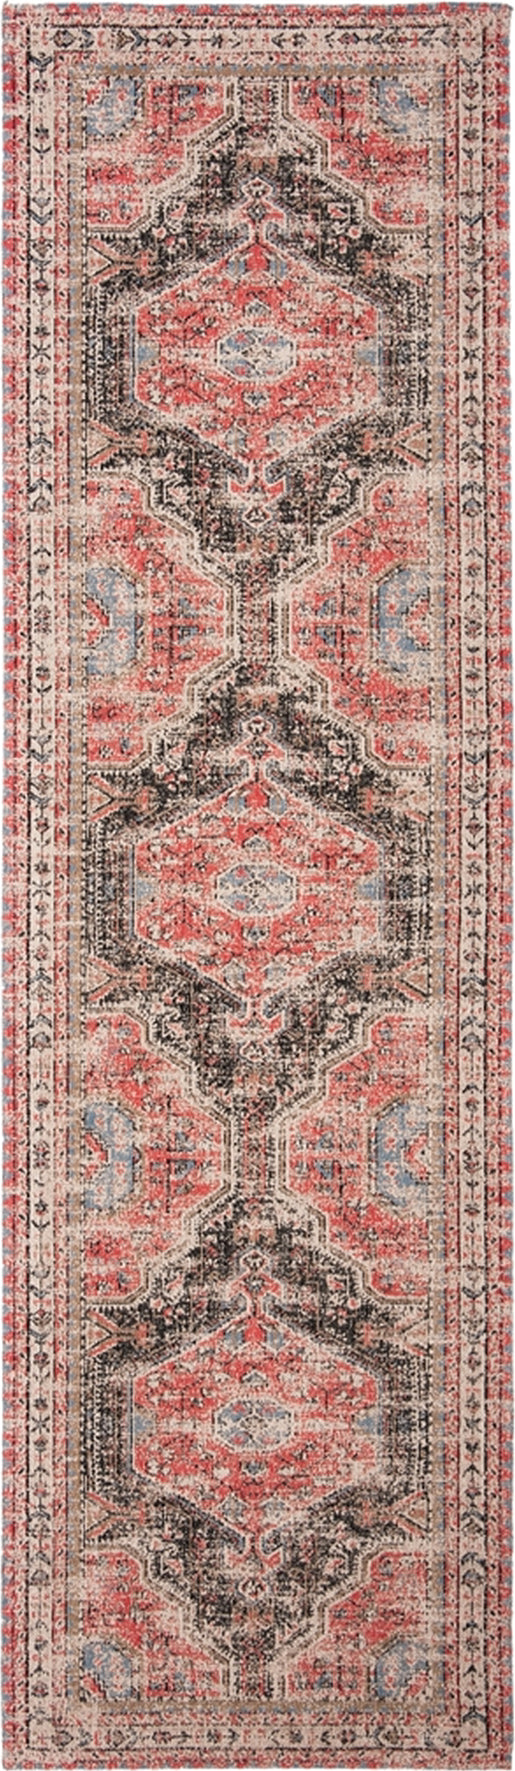 Safavieh Classic Vintage CLV308Q Red/Charcoal Area Rug main image